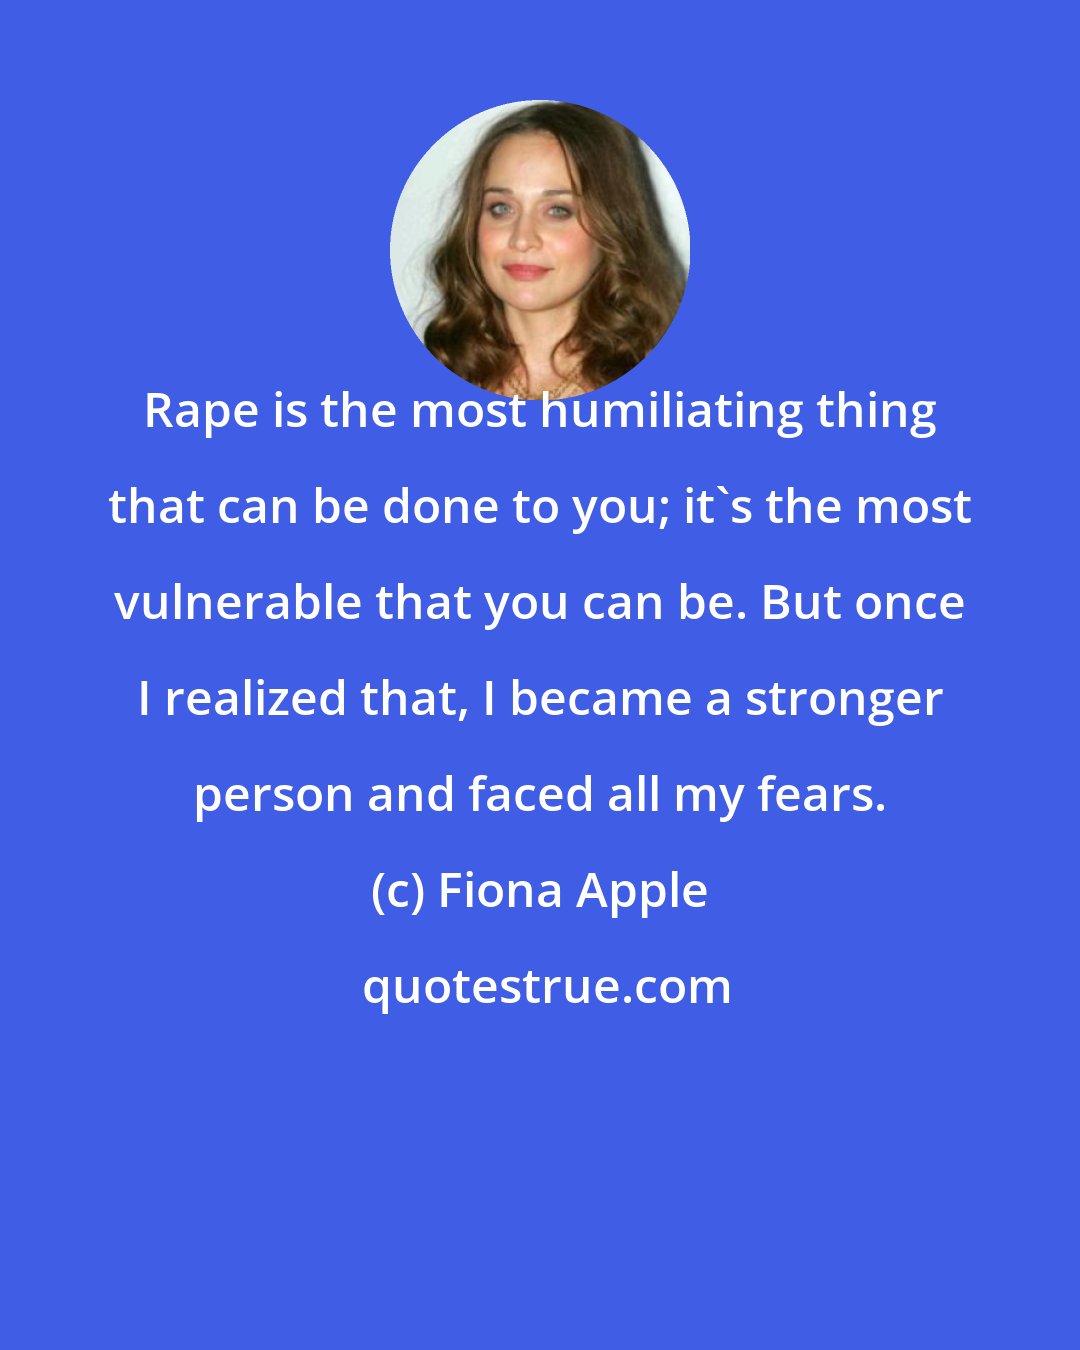 Fiona Apple: Rape is the most humiliating thing that can be done to you; it's the most vulnerable that you can be. But once I realized that, I became a stronger person and faced all my fears.